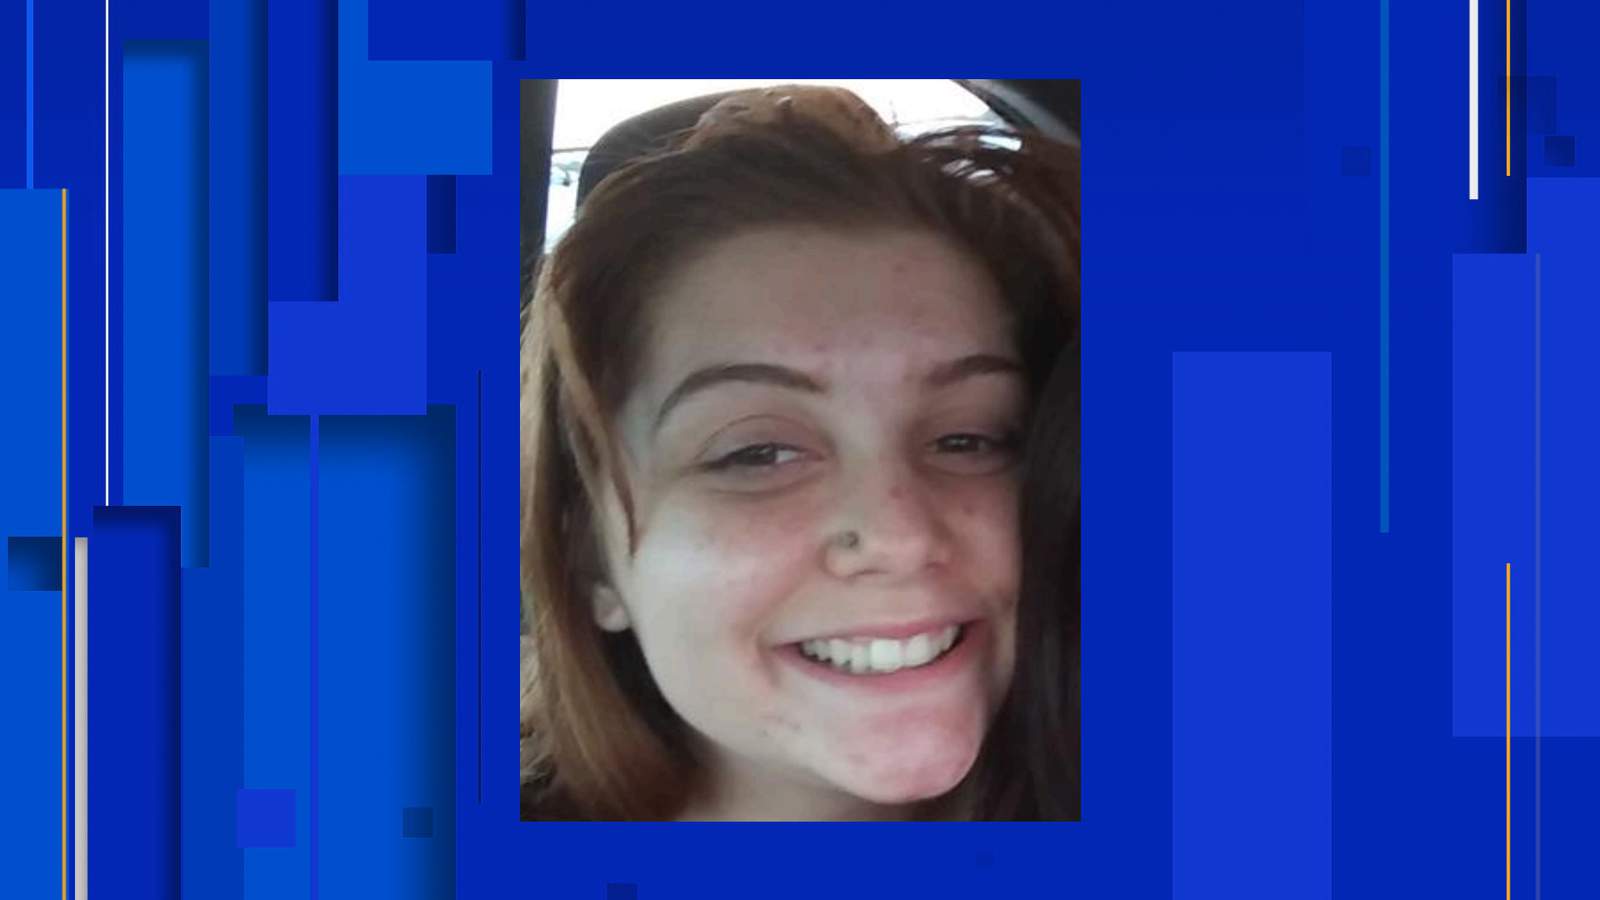 San Antonio police search for girl, 17, reported missing